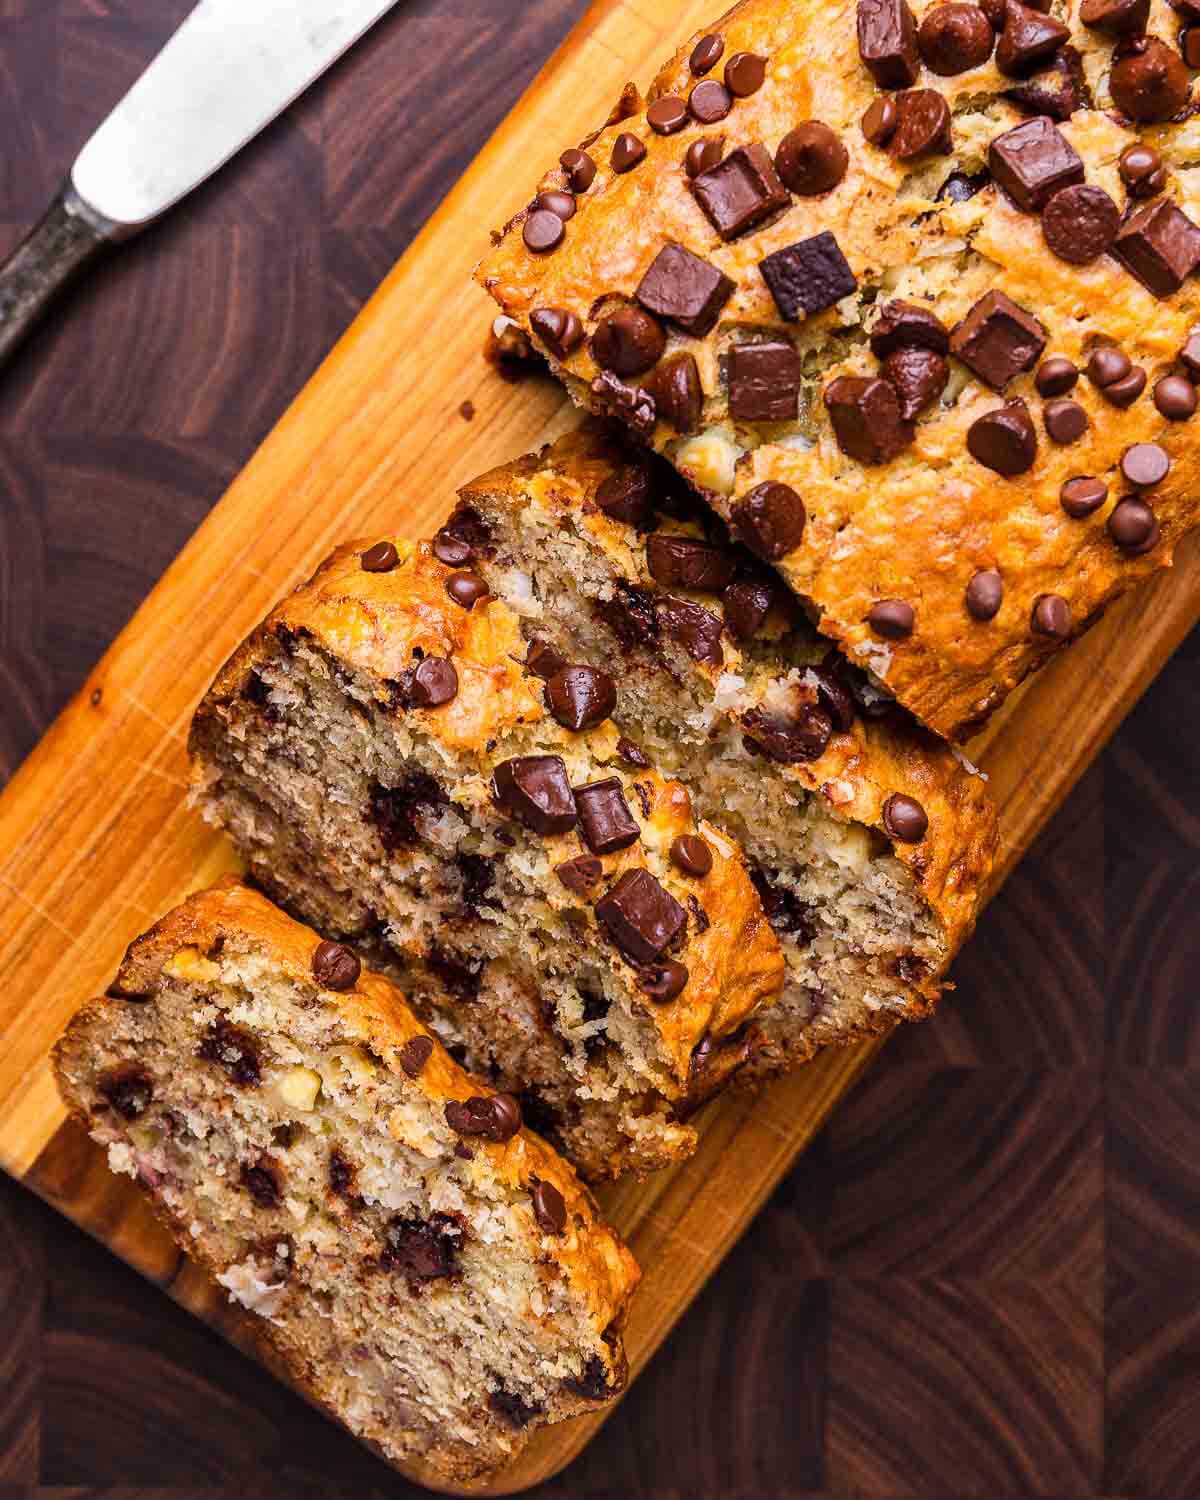 Sliced chocolate chip banana bread on small wood serving board.